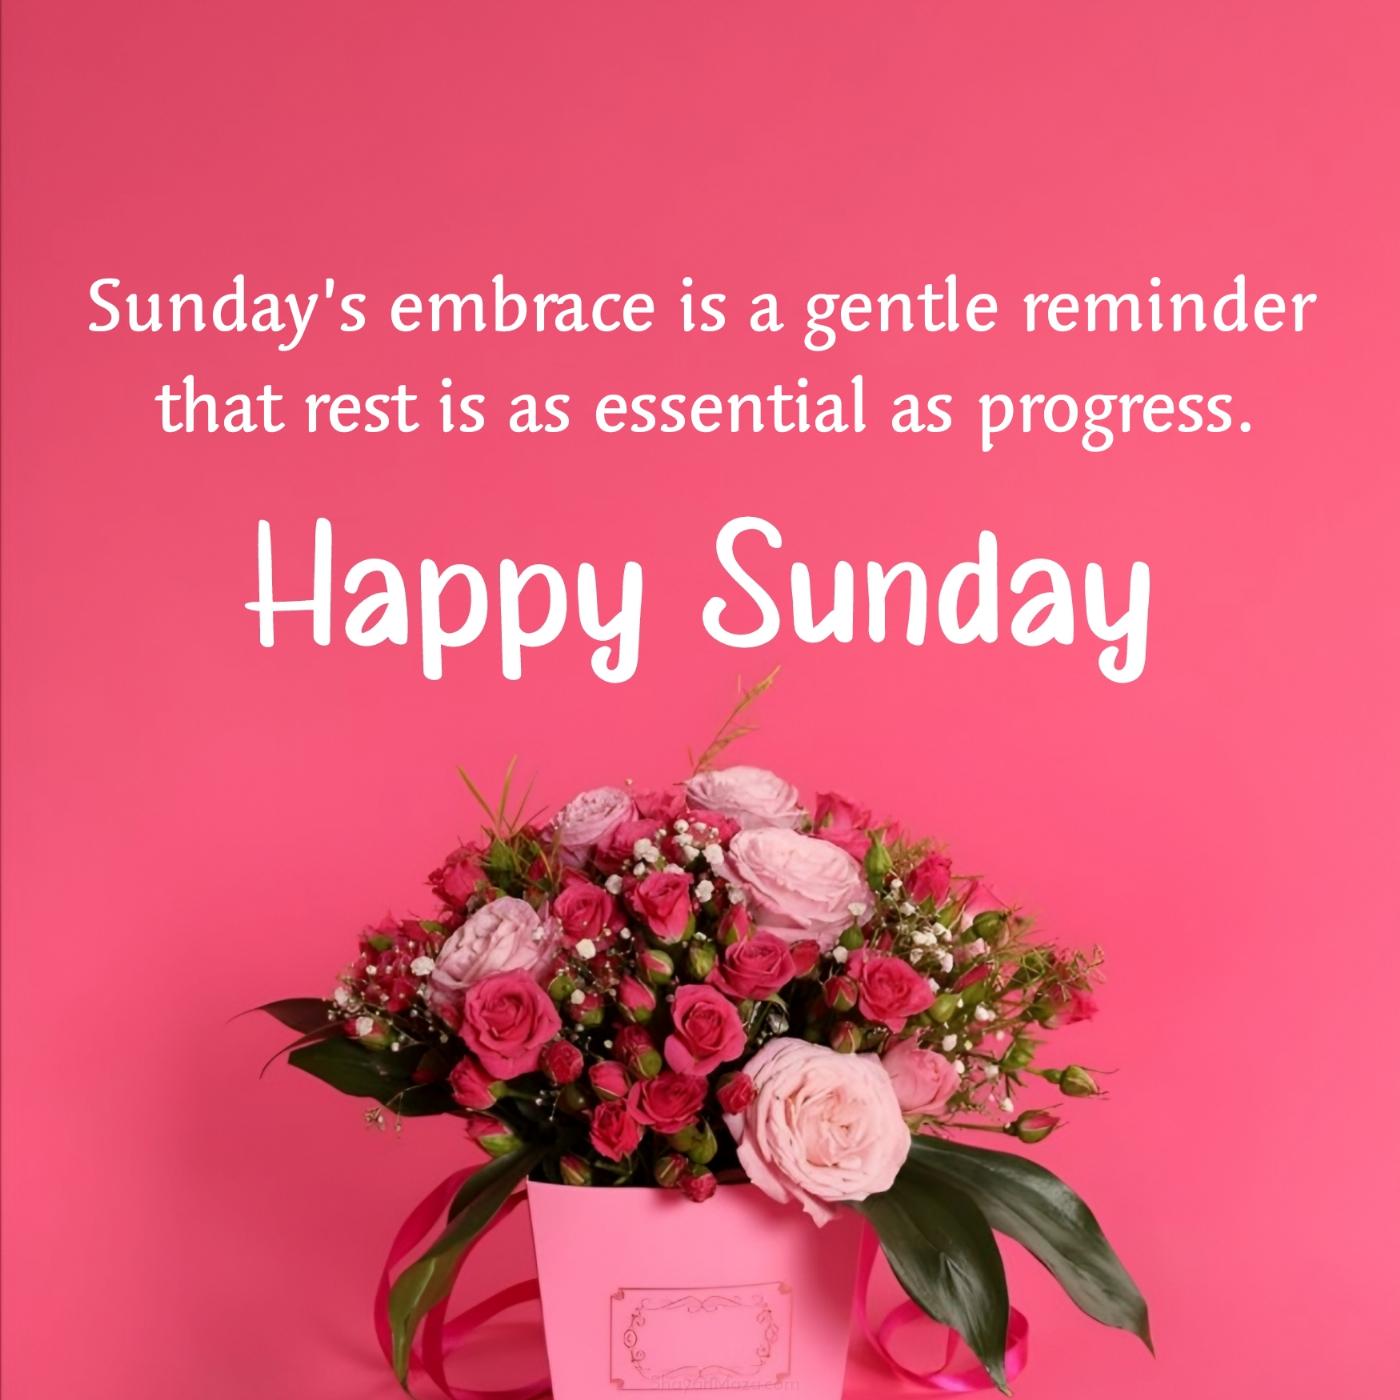 Sundays embrace is a gentle reminder that rest is as essential